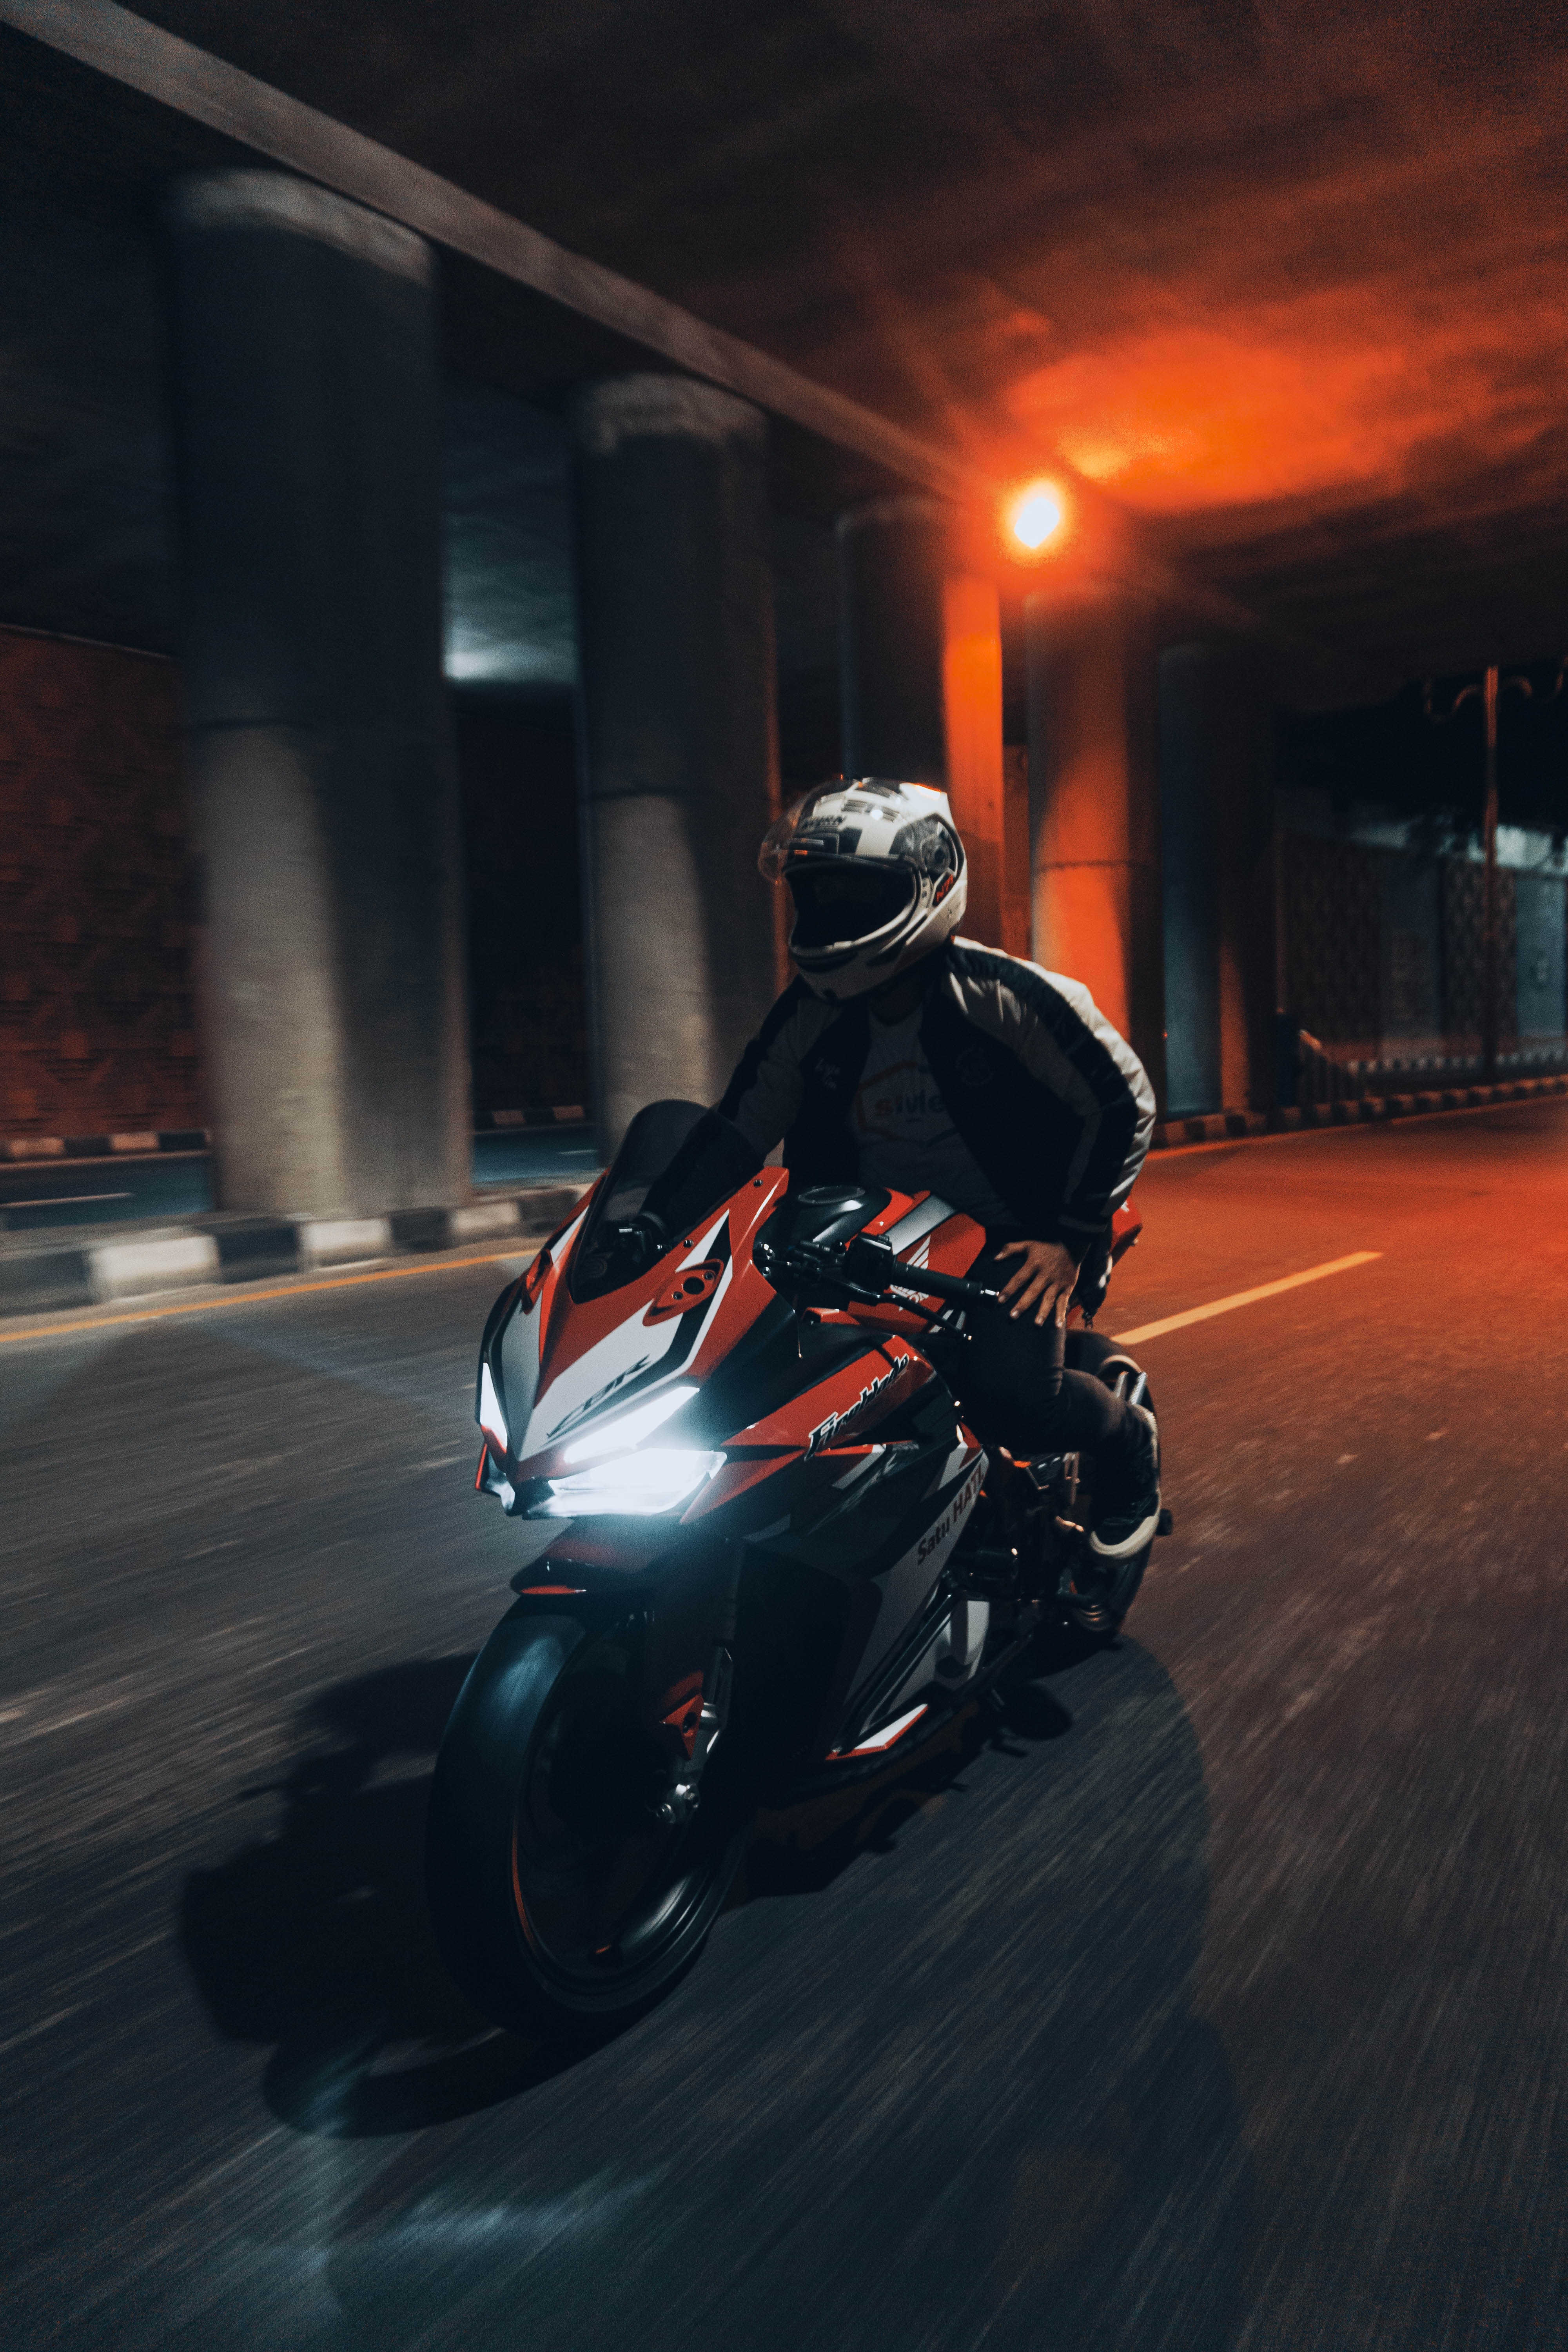 motorcycles, speed, motorcycle, motorcyclist, road, tunnel